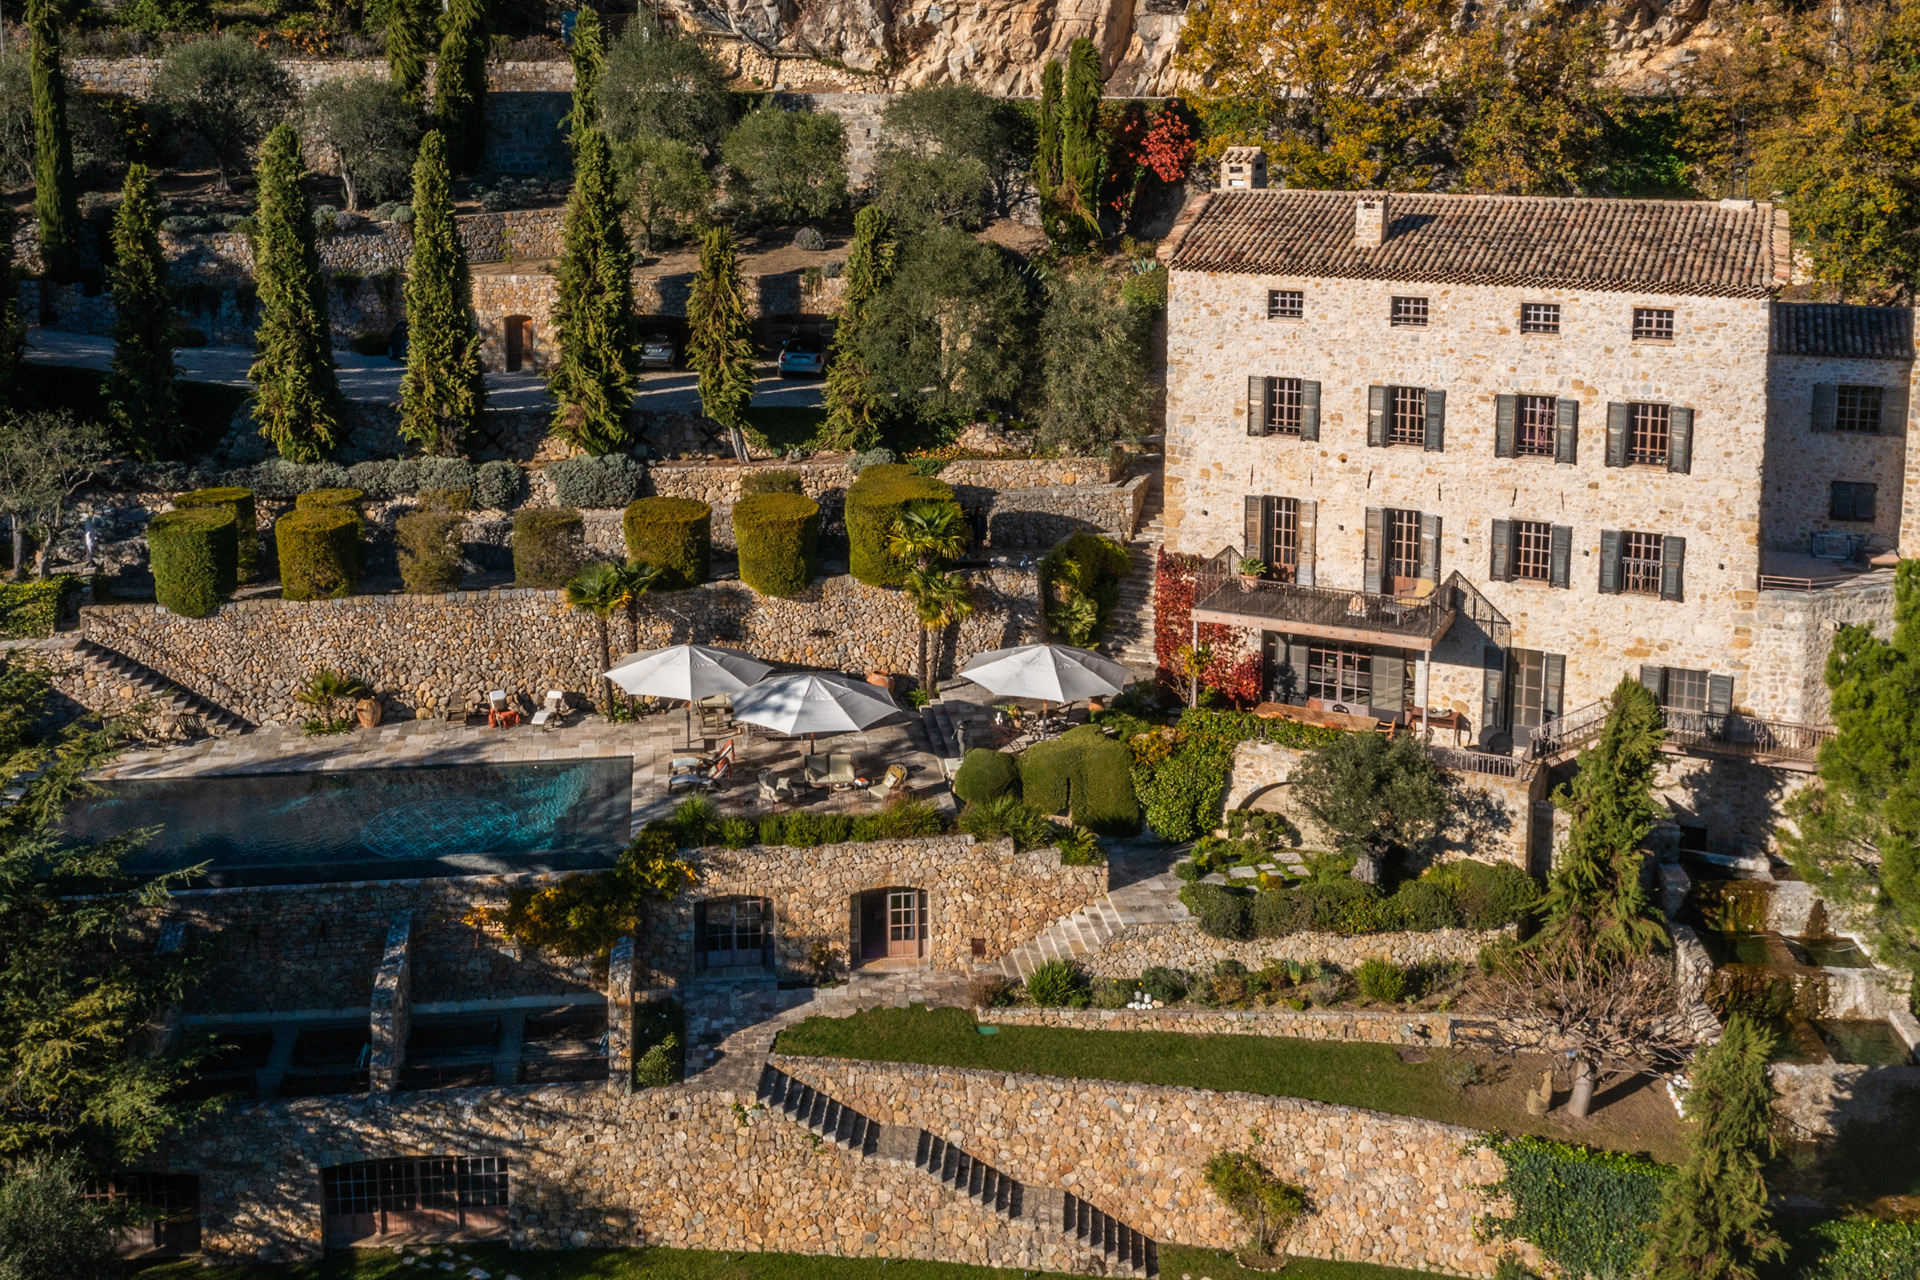 Looking For A Holiday Home? Check Out This Spectacular Converted Mill In France